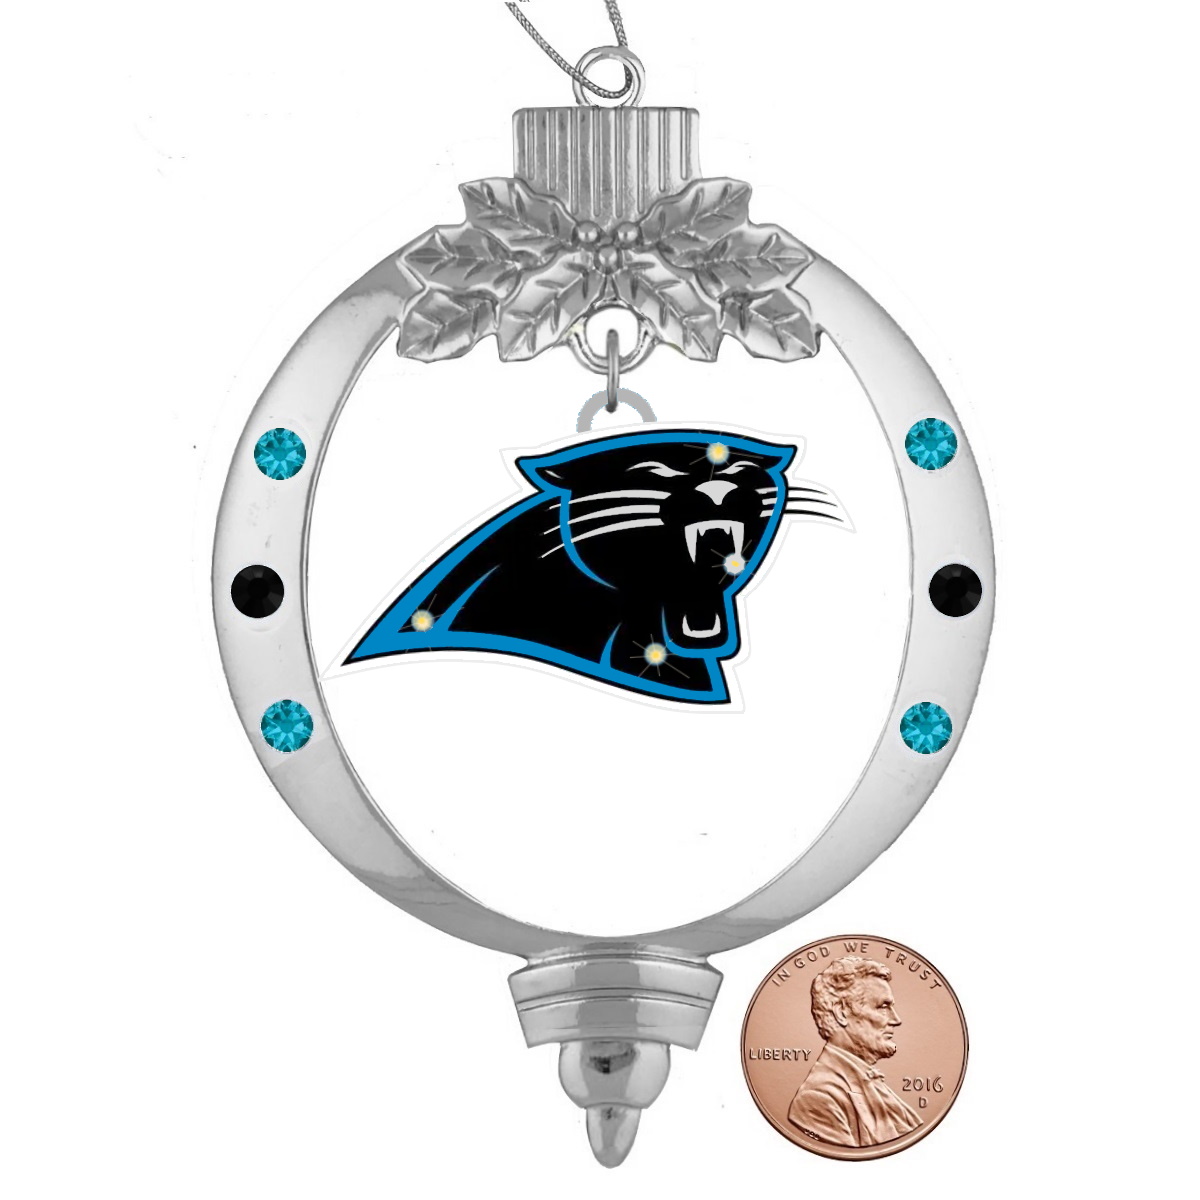 Carolina Panthers LED Blinking Christmas Ornament – Final Touch Gifts